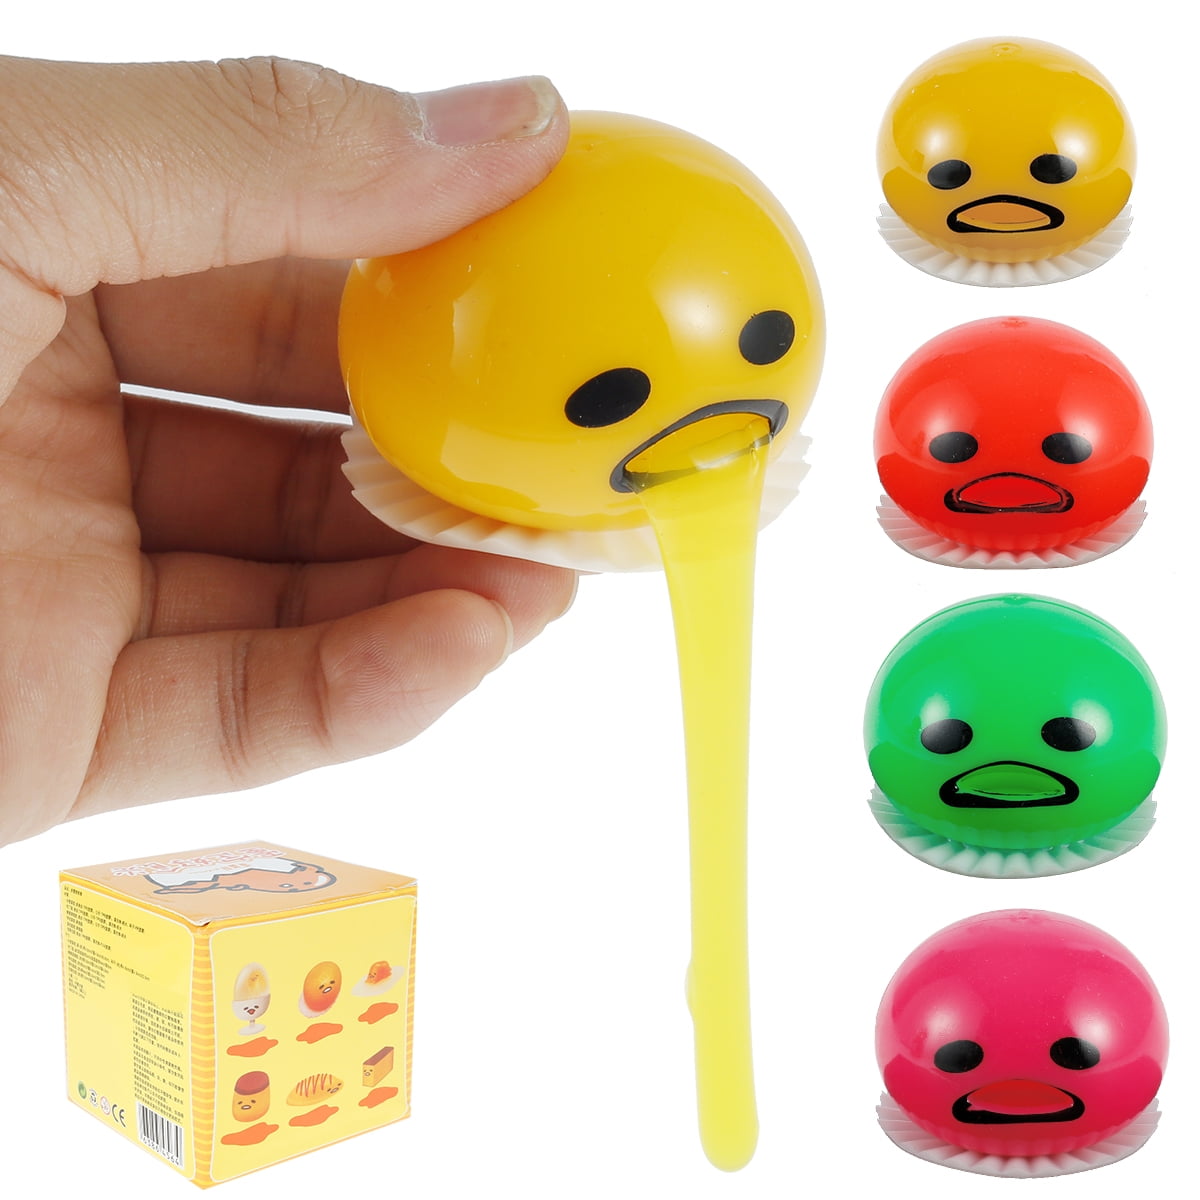 Hands DIY Funny Stress Relief Toy Vomiting Sucking Lazy Egg Yolk Vent Decompression Squeeze Toy Fidget Sensory Toy Novelty Cute Relief Toys Bubble Toy